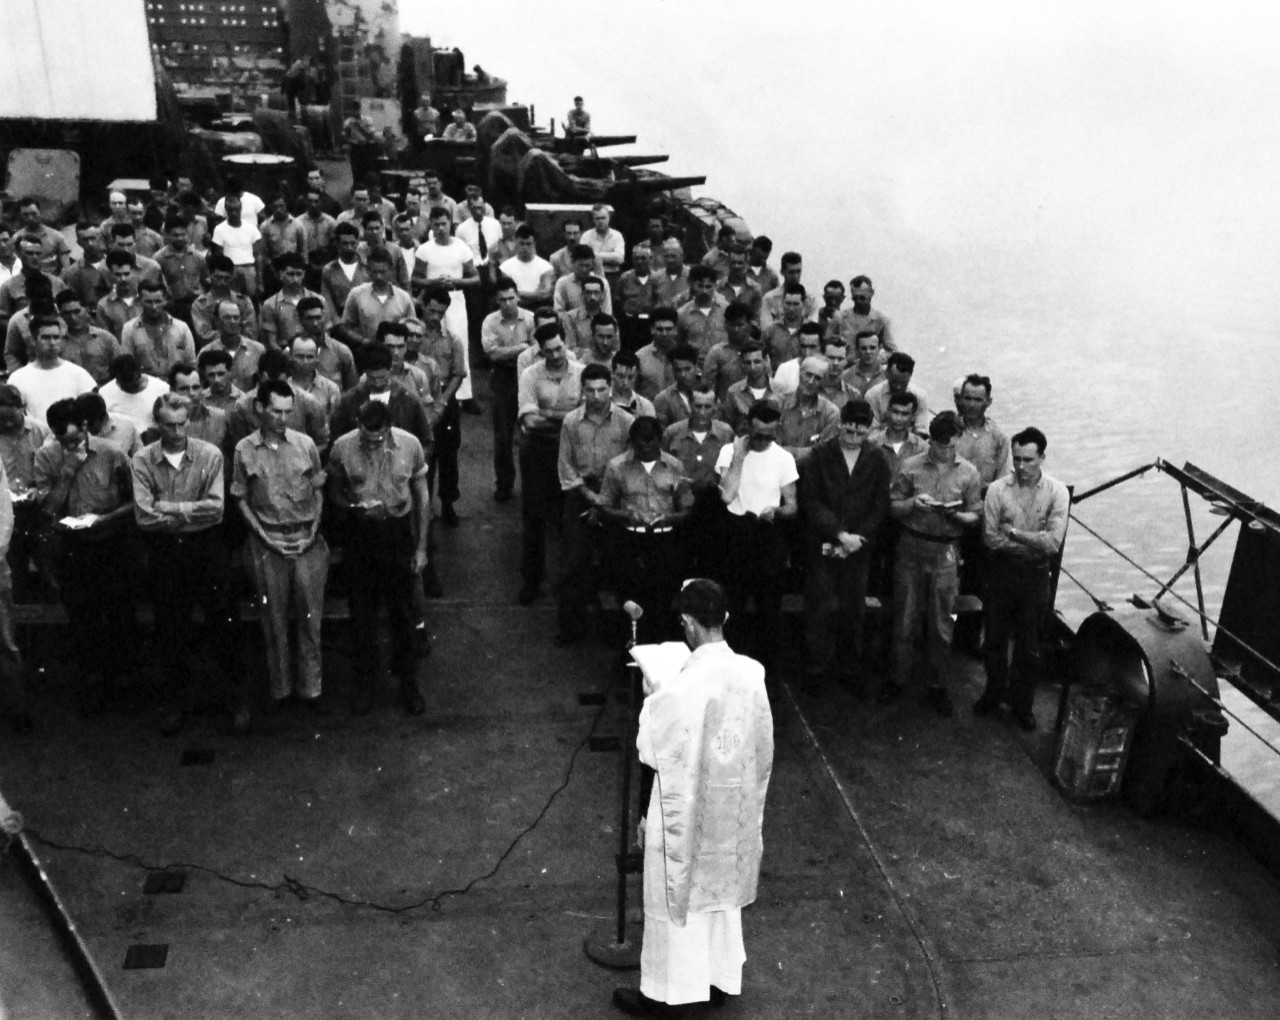 80-G-344561:  Allied Prisoners of War, 1945.    Major Albert W. Braun, U.S. Army Chaplain, holding divine services aboard ship.  Major Braun was captured by the Japanese at Corregidor on May 5, 1942, but the Japanese allowed him to conduct services in bath houses and Philippine natives helped getting altar supplies for him.  Photograph released September 24, 1945.  Official U.S. Navy photograph, now in the collections of the National Archives.   (2015/11/24).